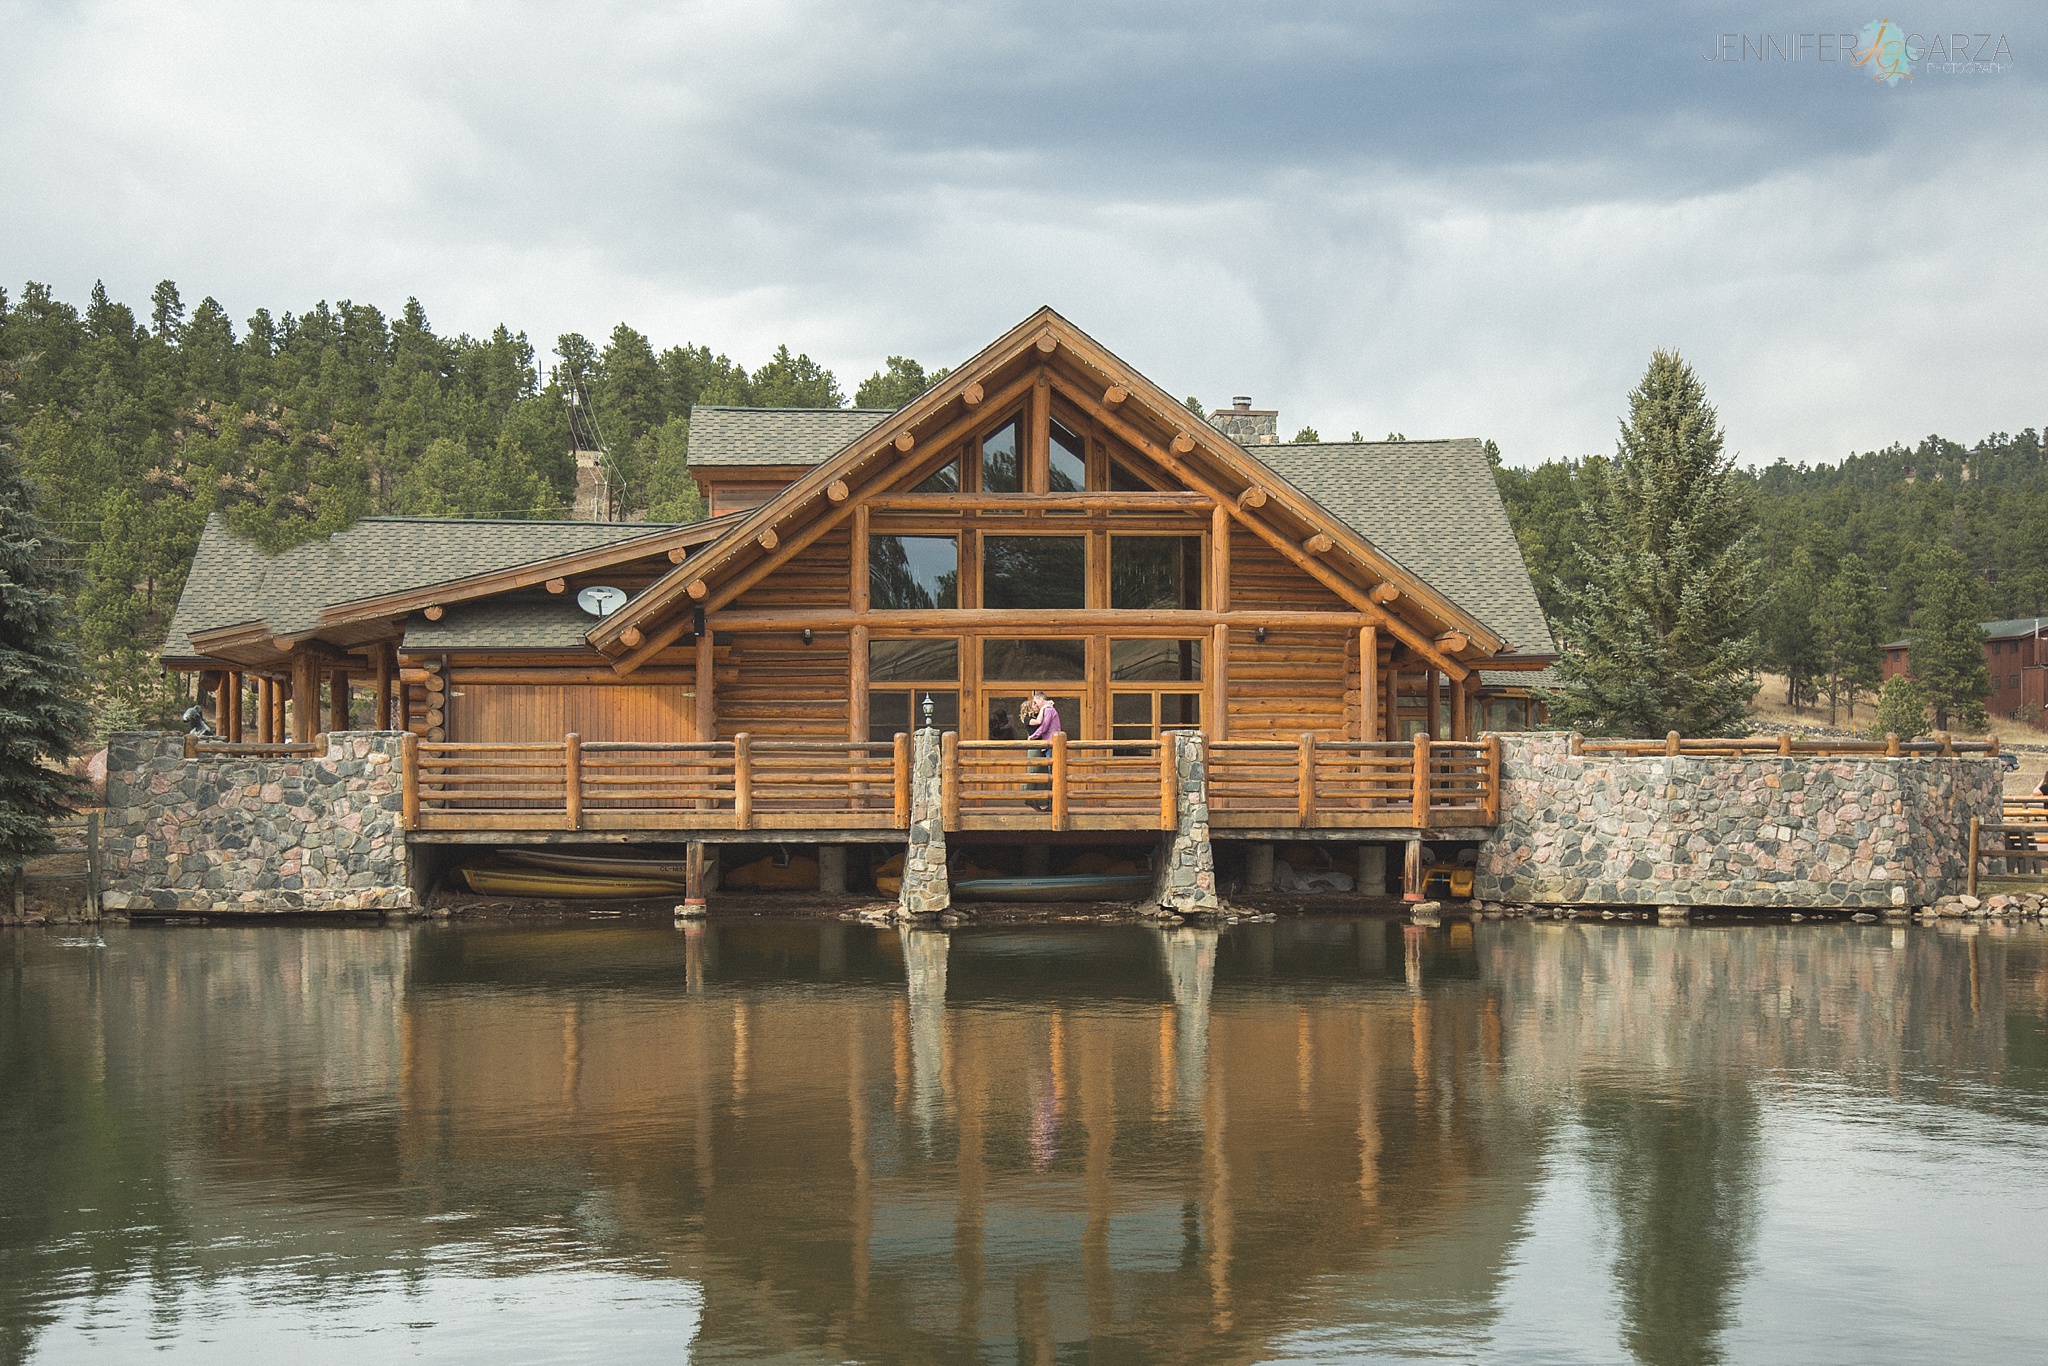 Evergreen Lake House makes a great location for Engagement Shoots.